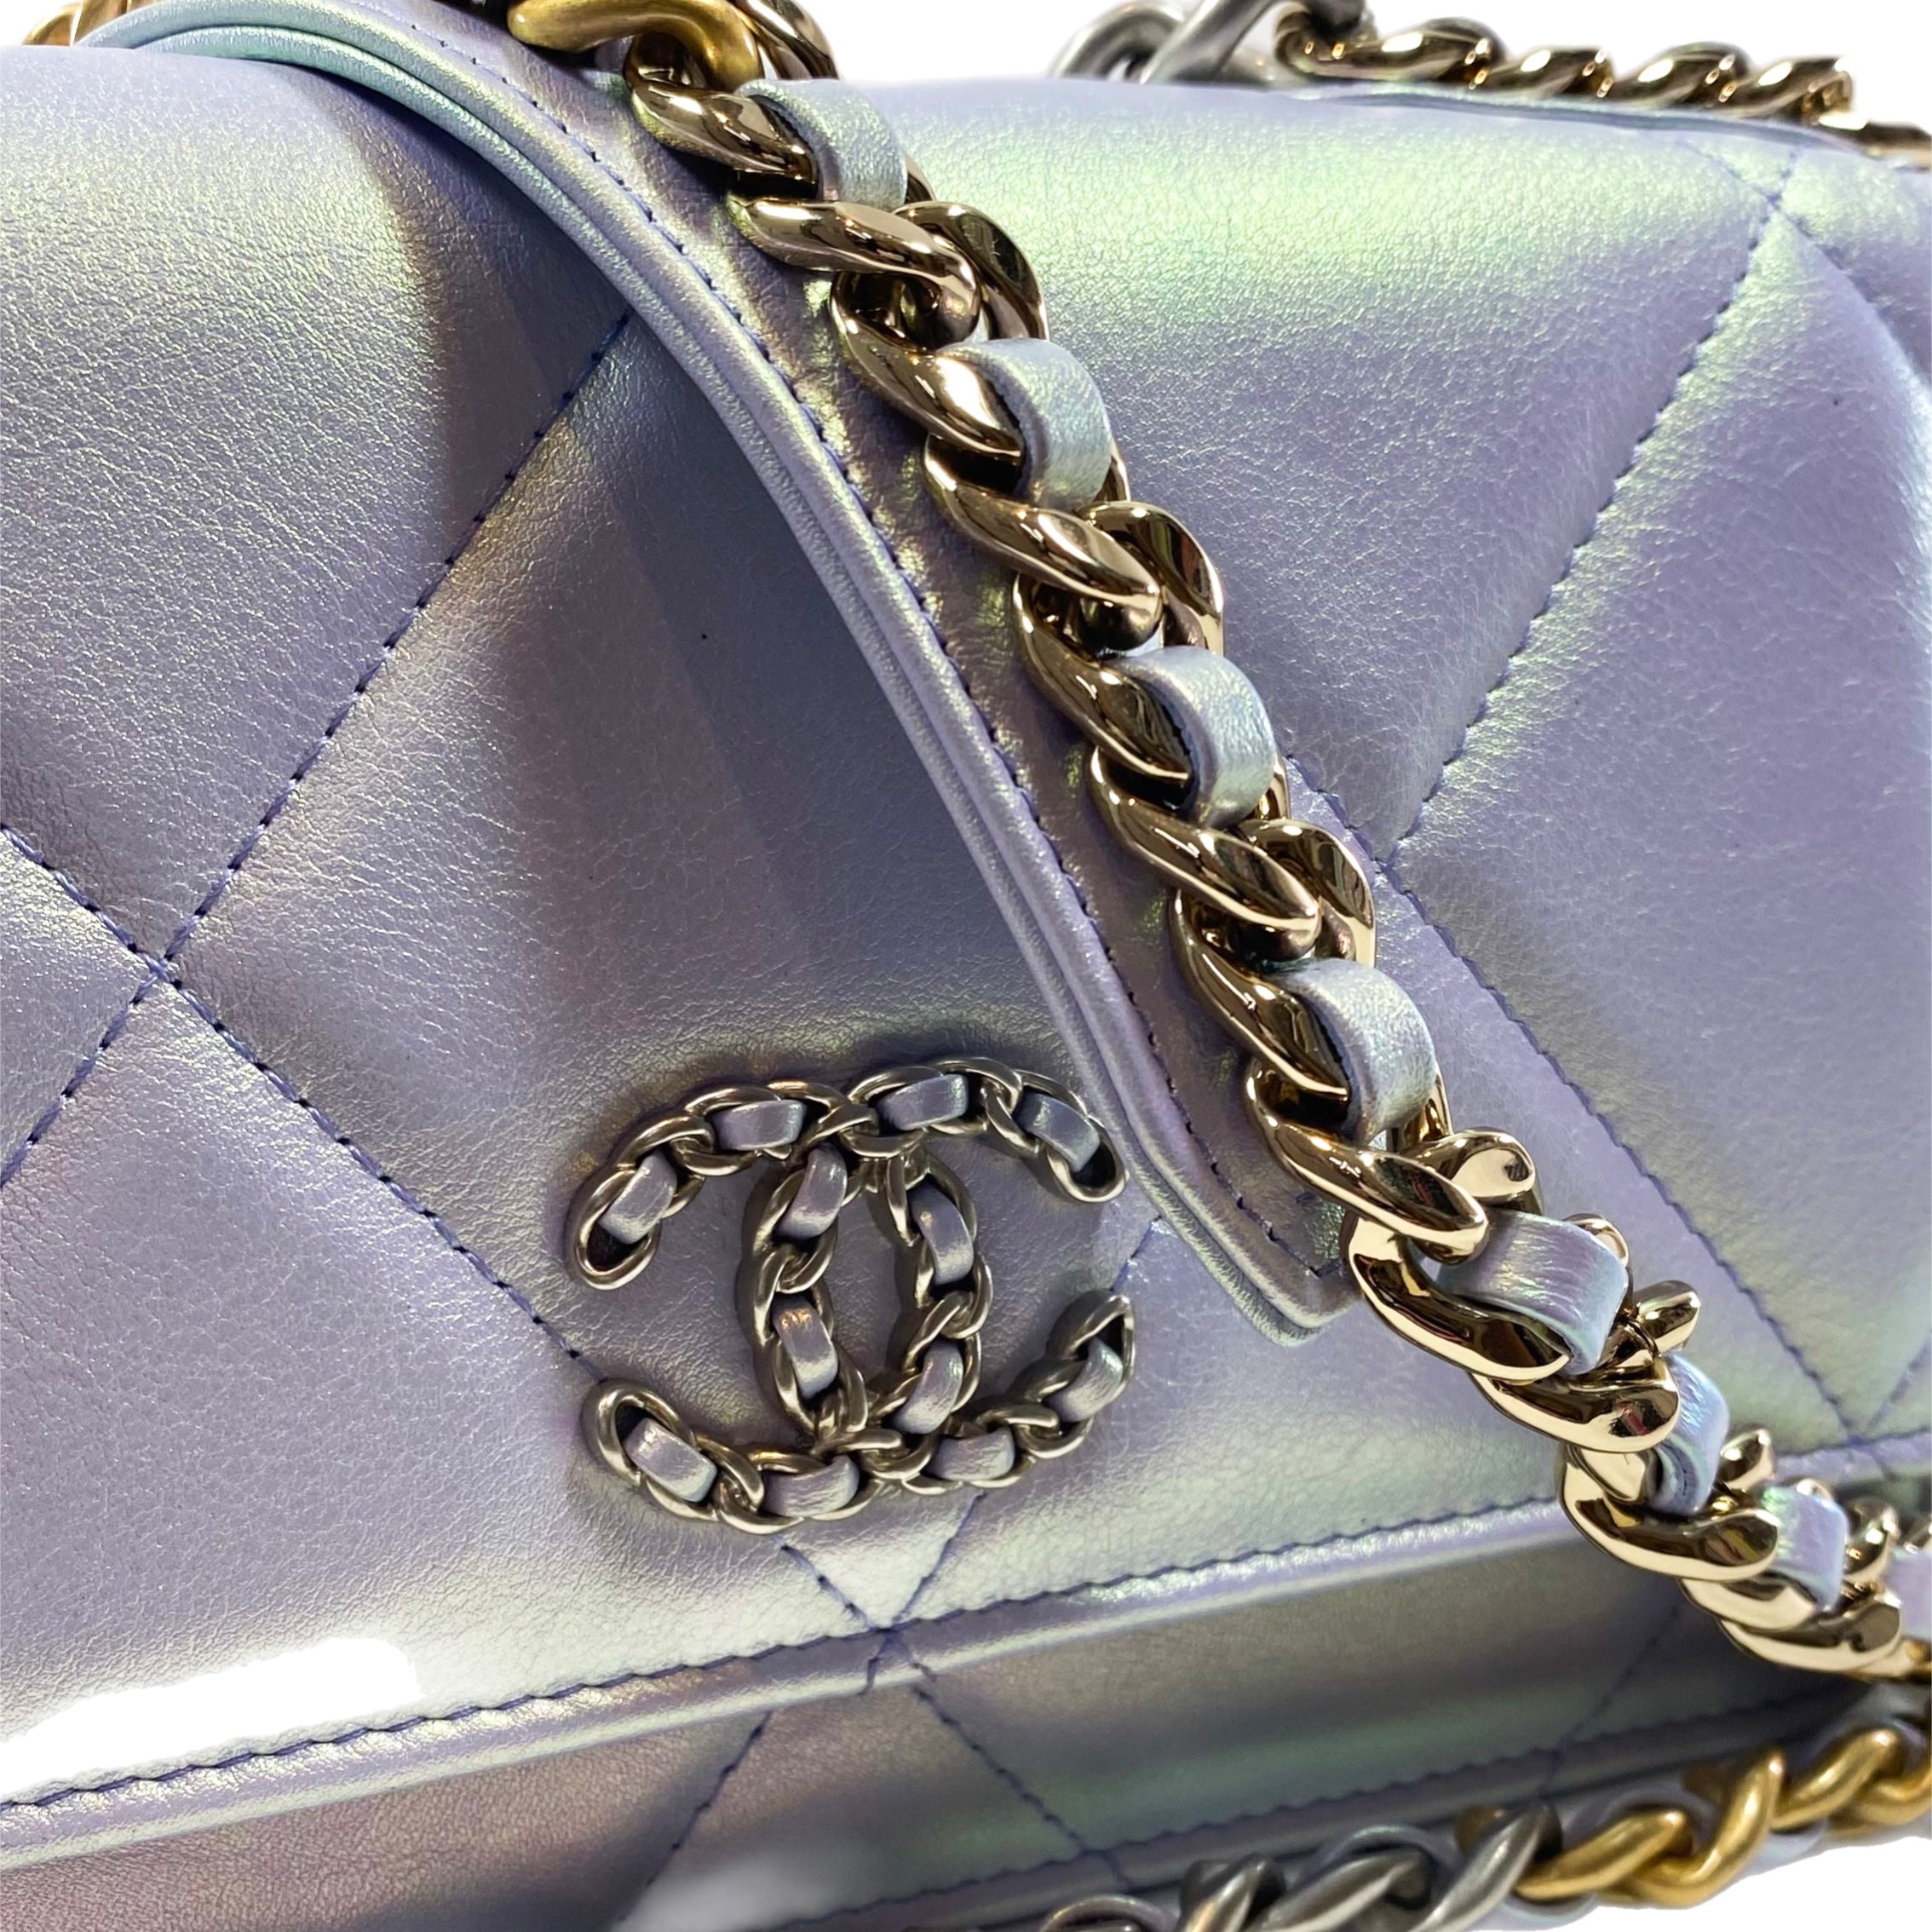 Chanel 19 Iridescent Light Purple Quilted Calfskin Wallet On Chain